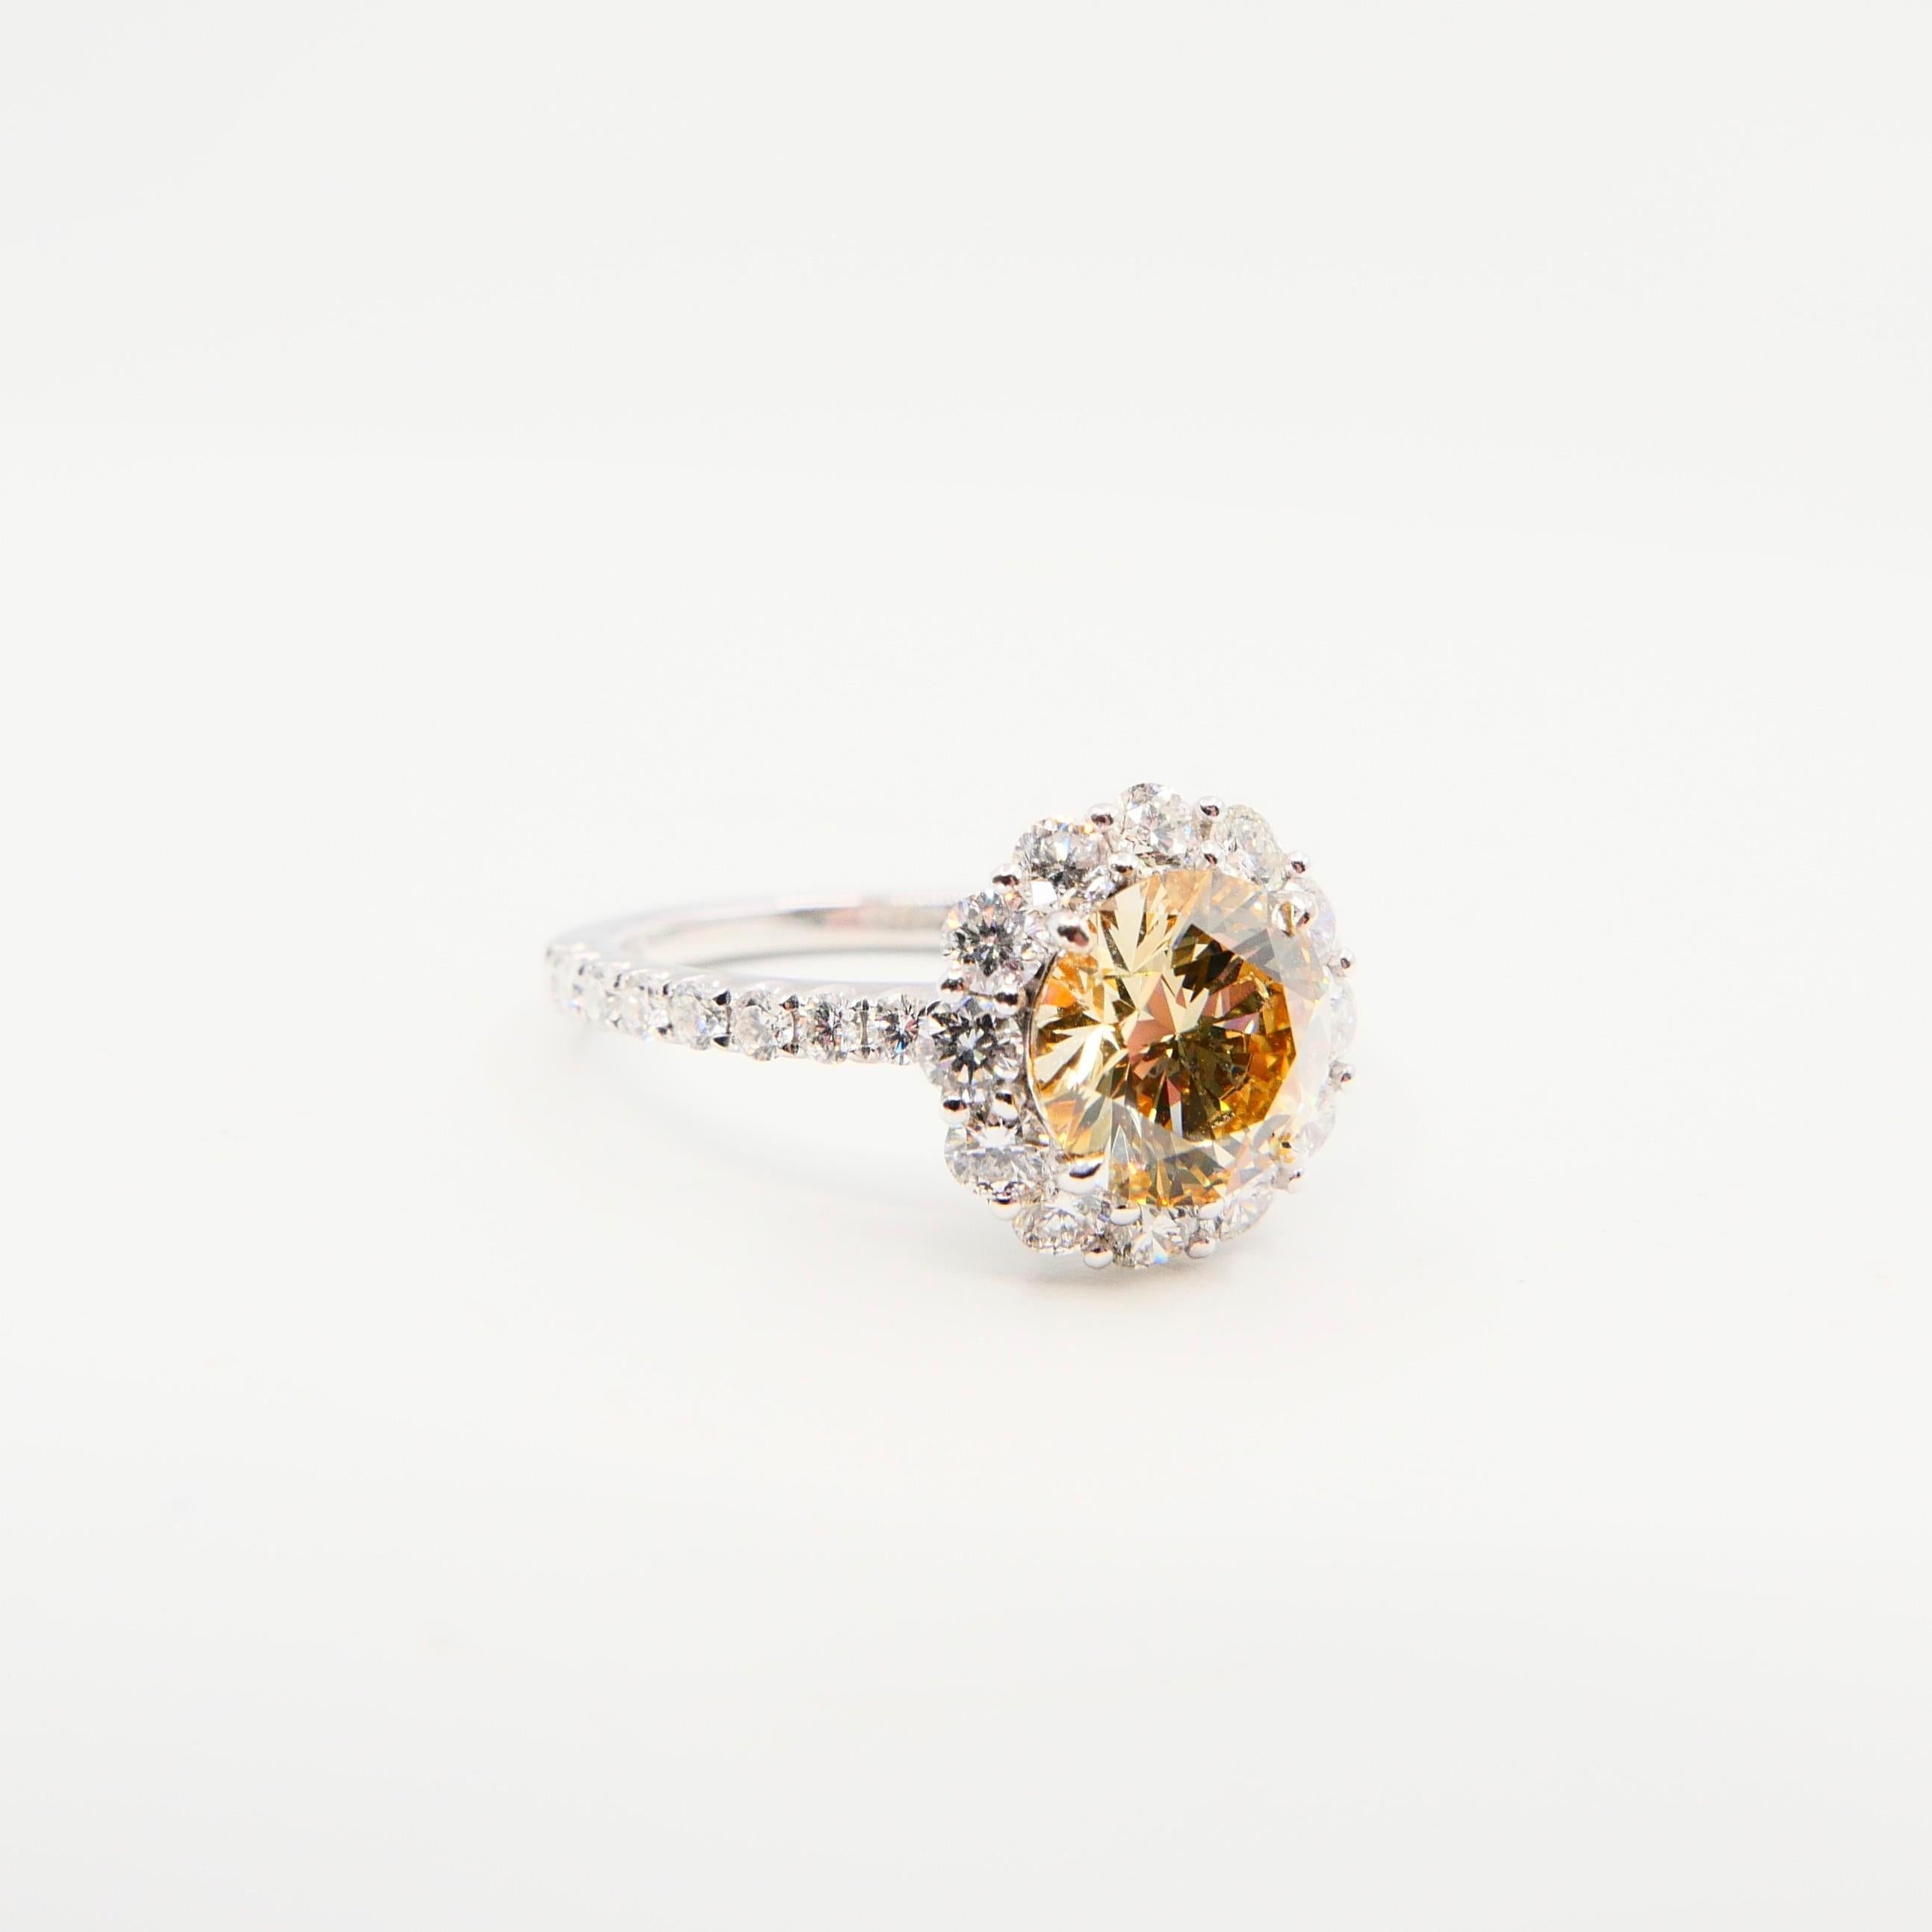 GIA Certified 1.23 Fancy Light Brownish Yellow Diamond Cocktail Ring VS2 Clarity 8